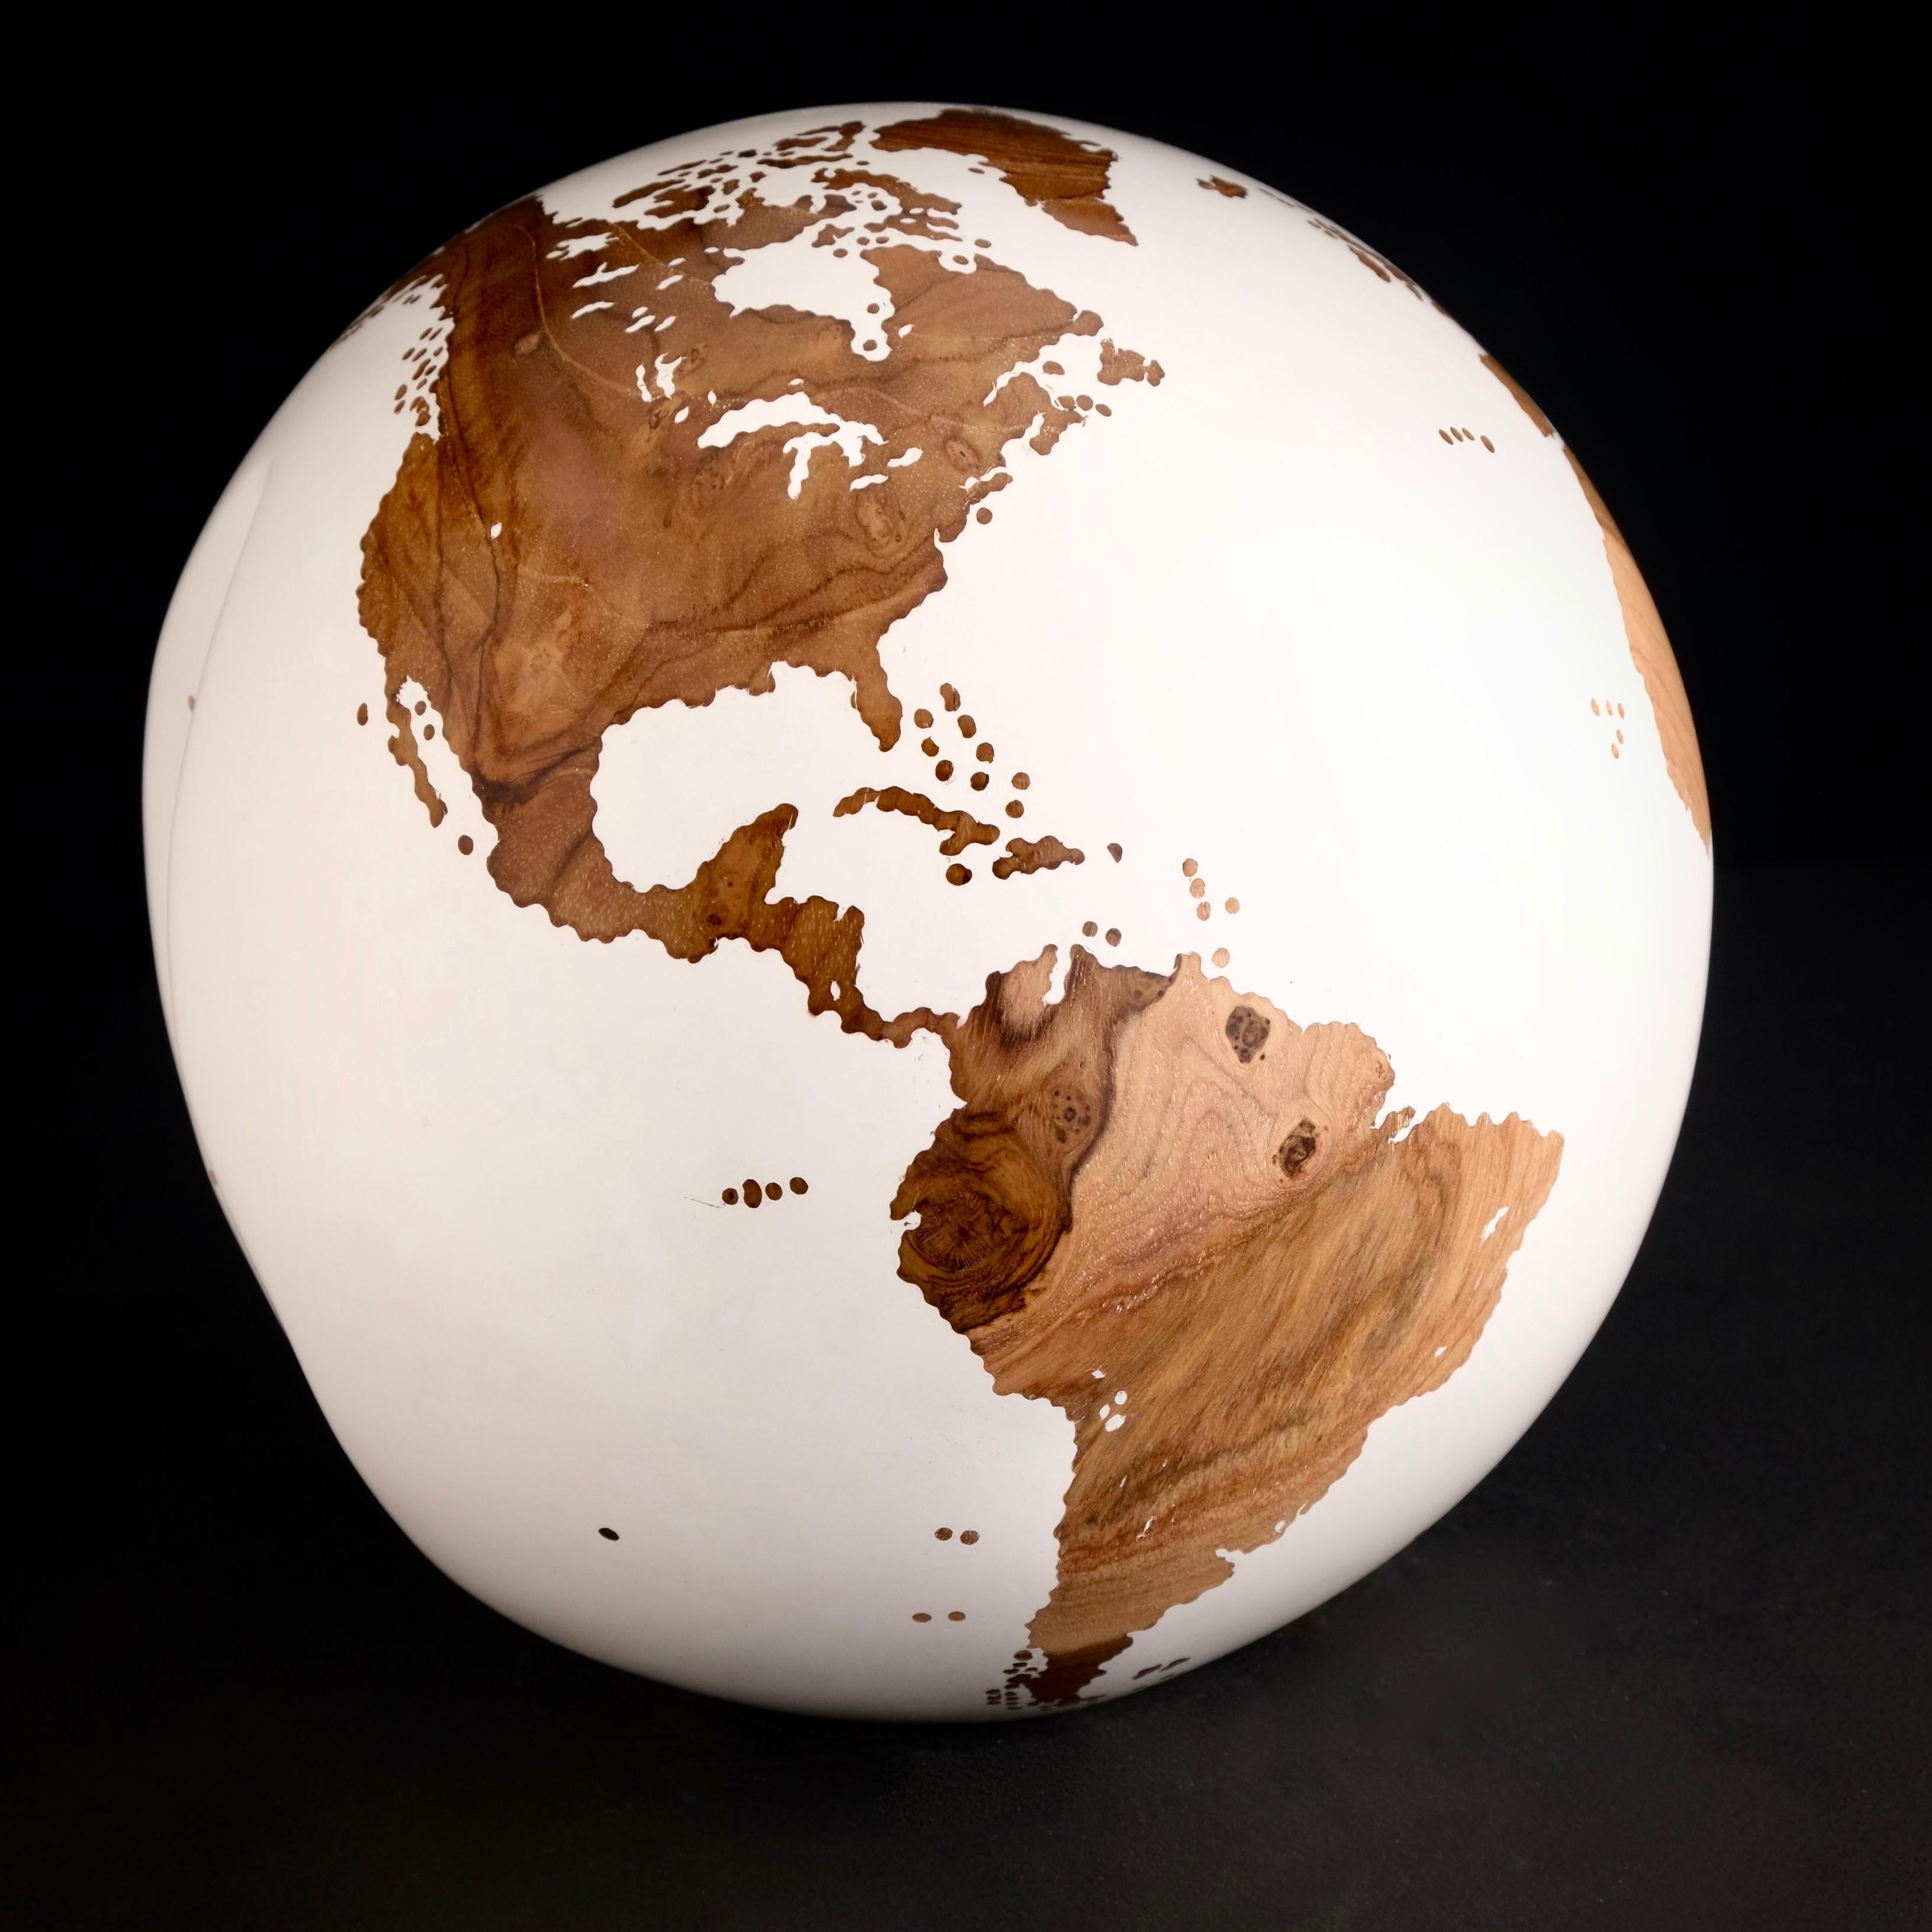 Teakwood and white lacquer make this beautiful turning globe a real stunning sculpture.
Made from a whole piece of wood the way the sculpture is shaped is defined by how the tree grew.
Sitting on a turning base the sculpture can spin silently